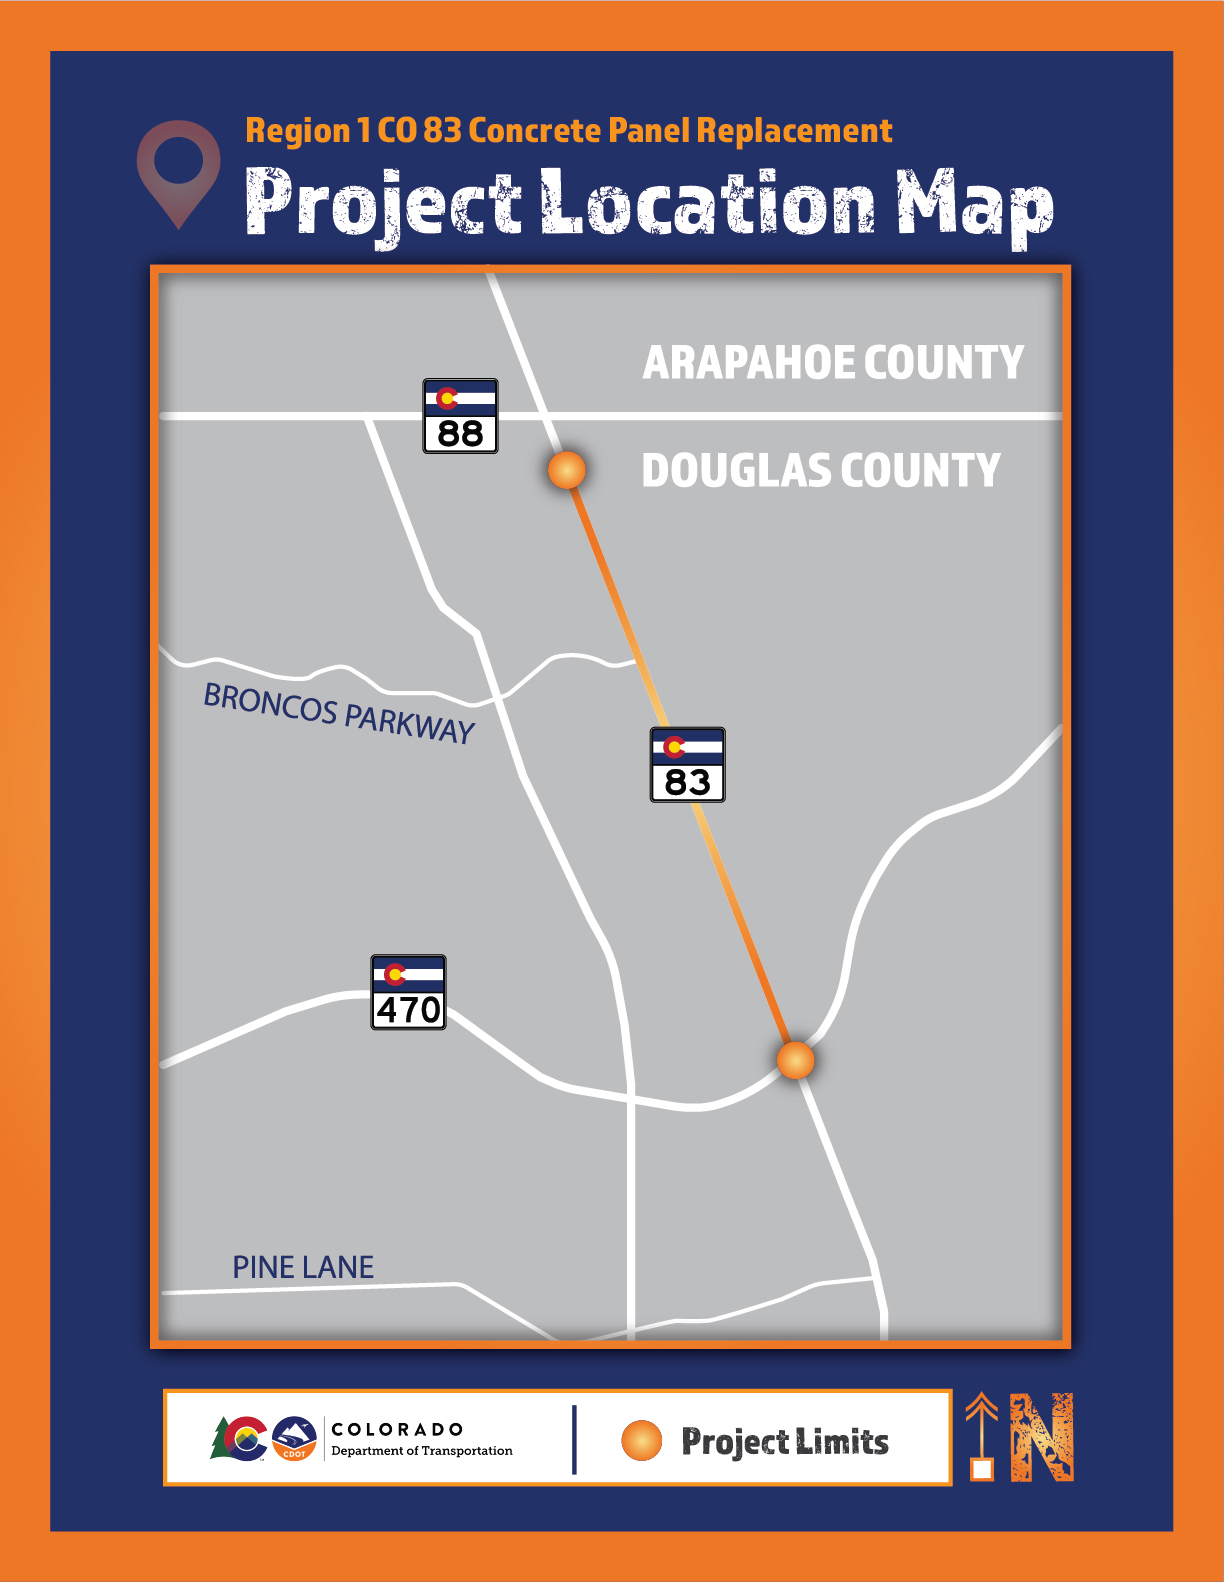 R1 CO 83 Panel Replacement Project Map v2 4.28.2021-01.jpg detail image